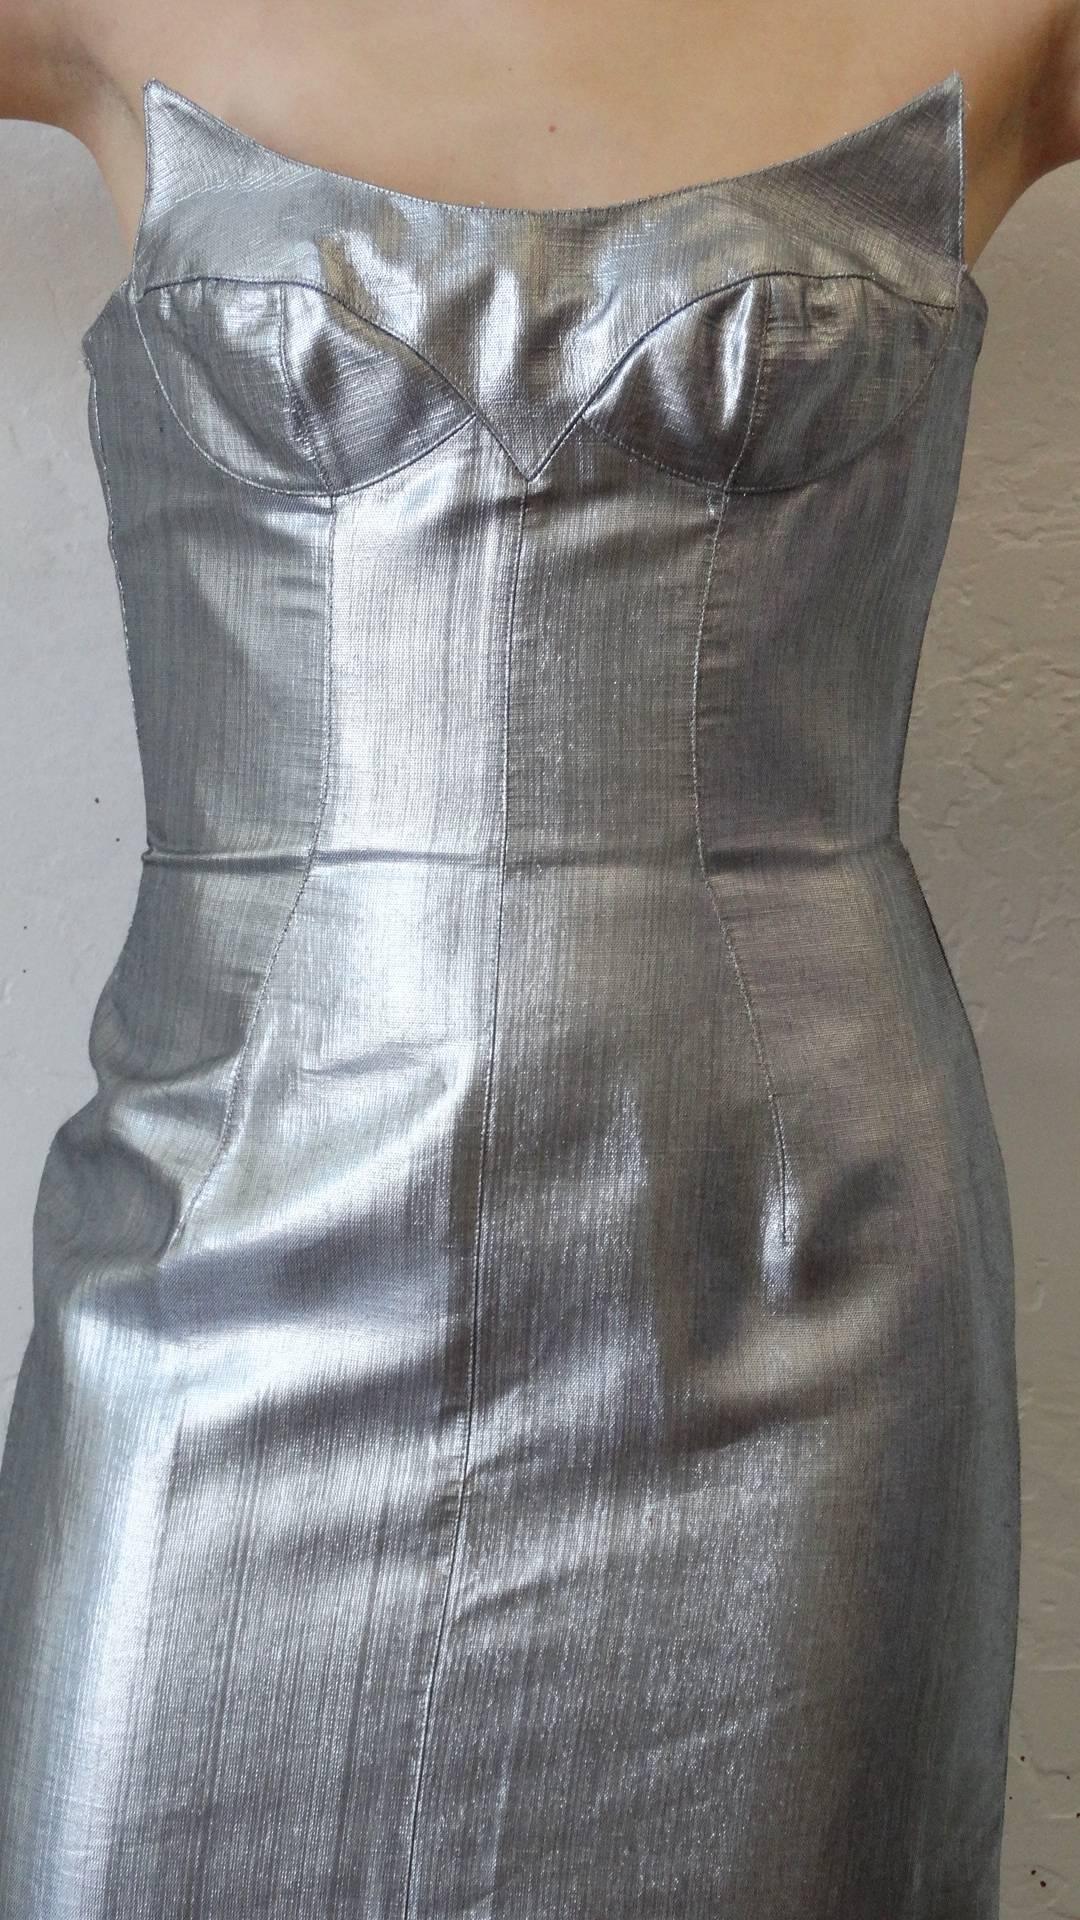  Thierry Mugler Couture Silver Sculpture Dress, Spring 1989 For Sale 4